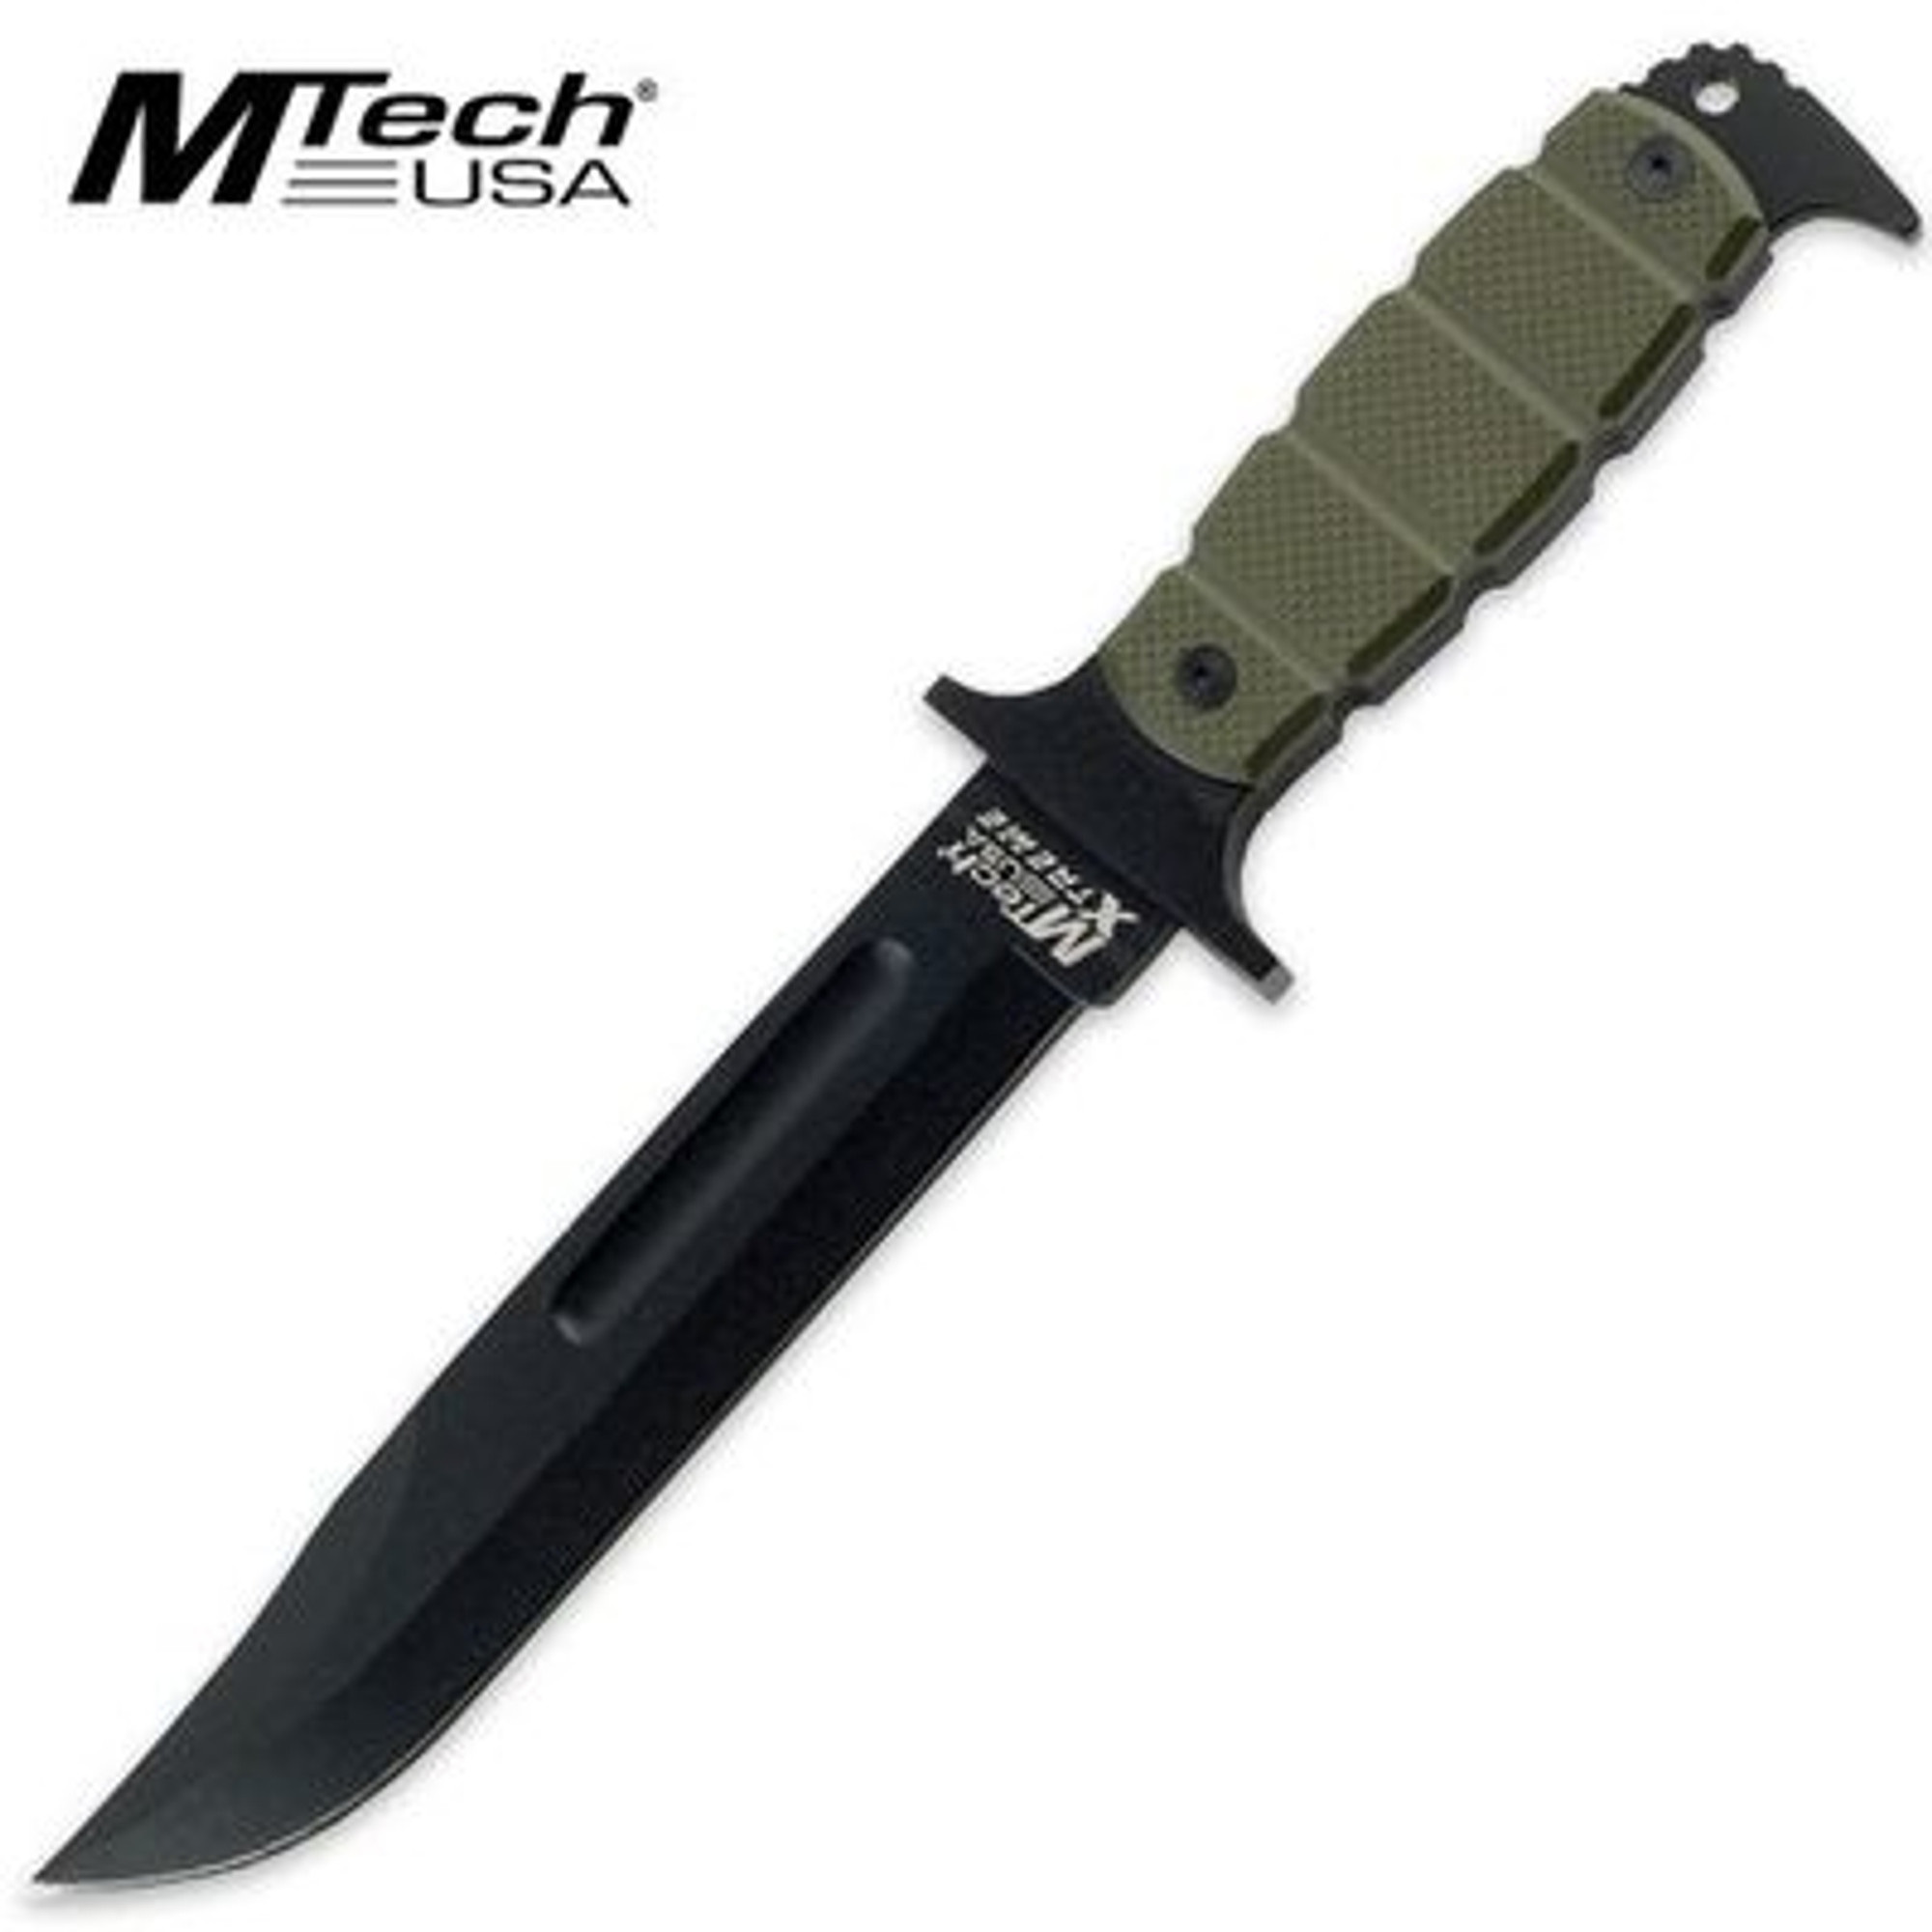 MTech Xtreme 12-Inch Fixed Blade Tactical Knife OD Green